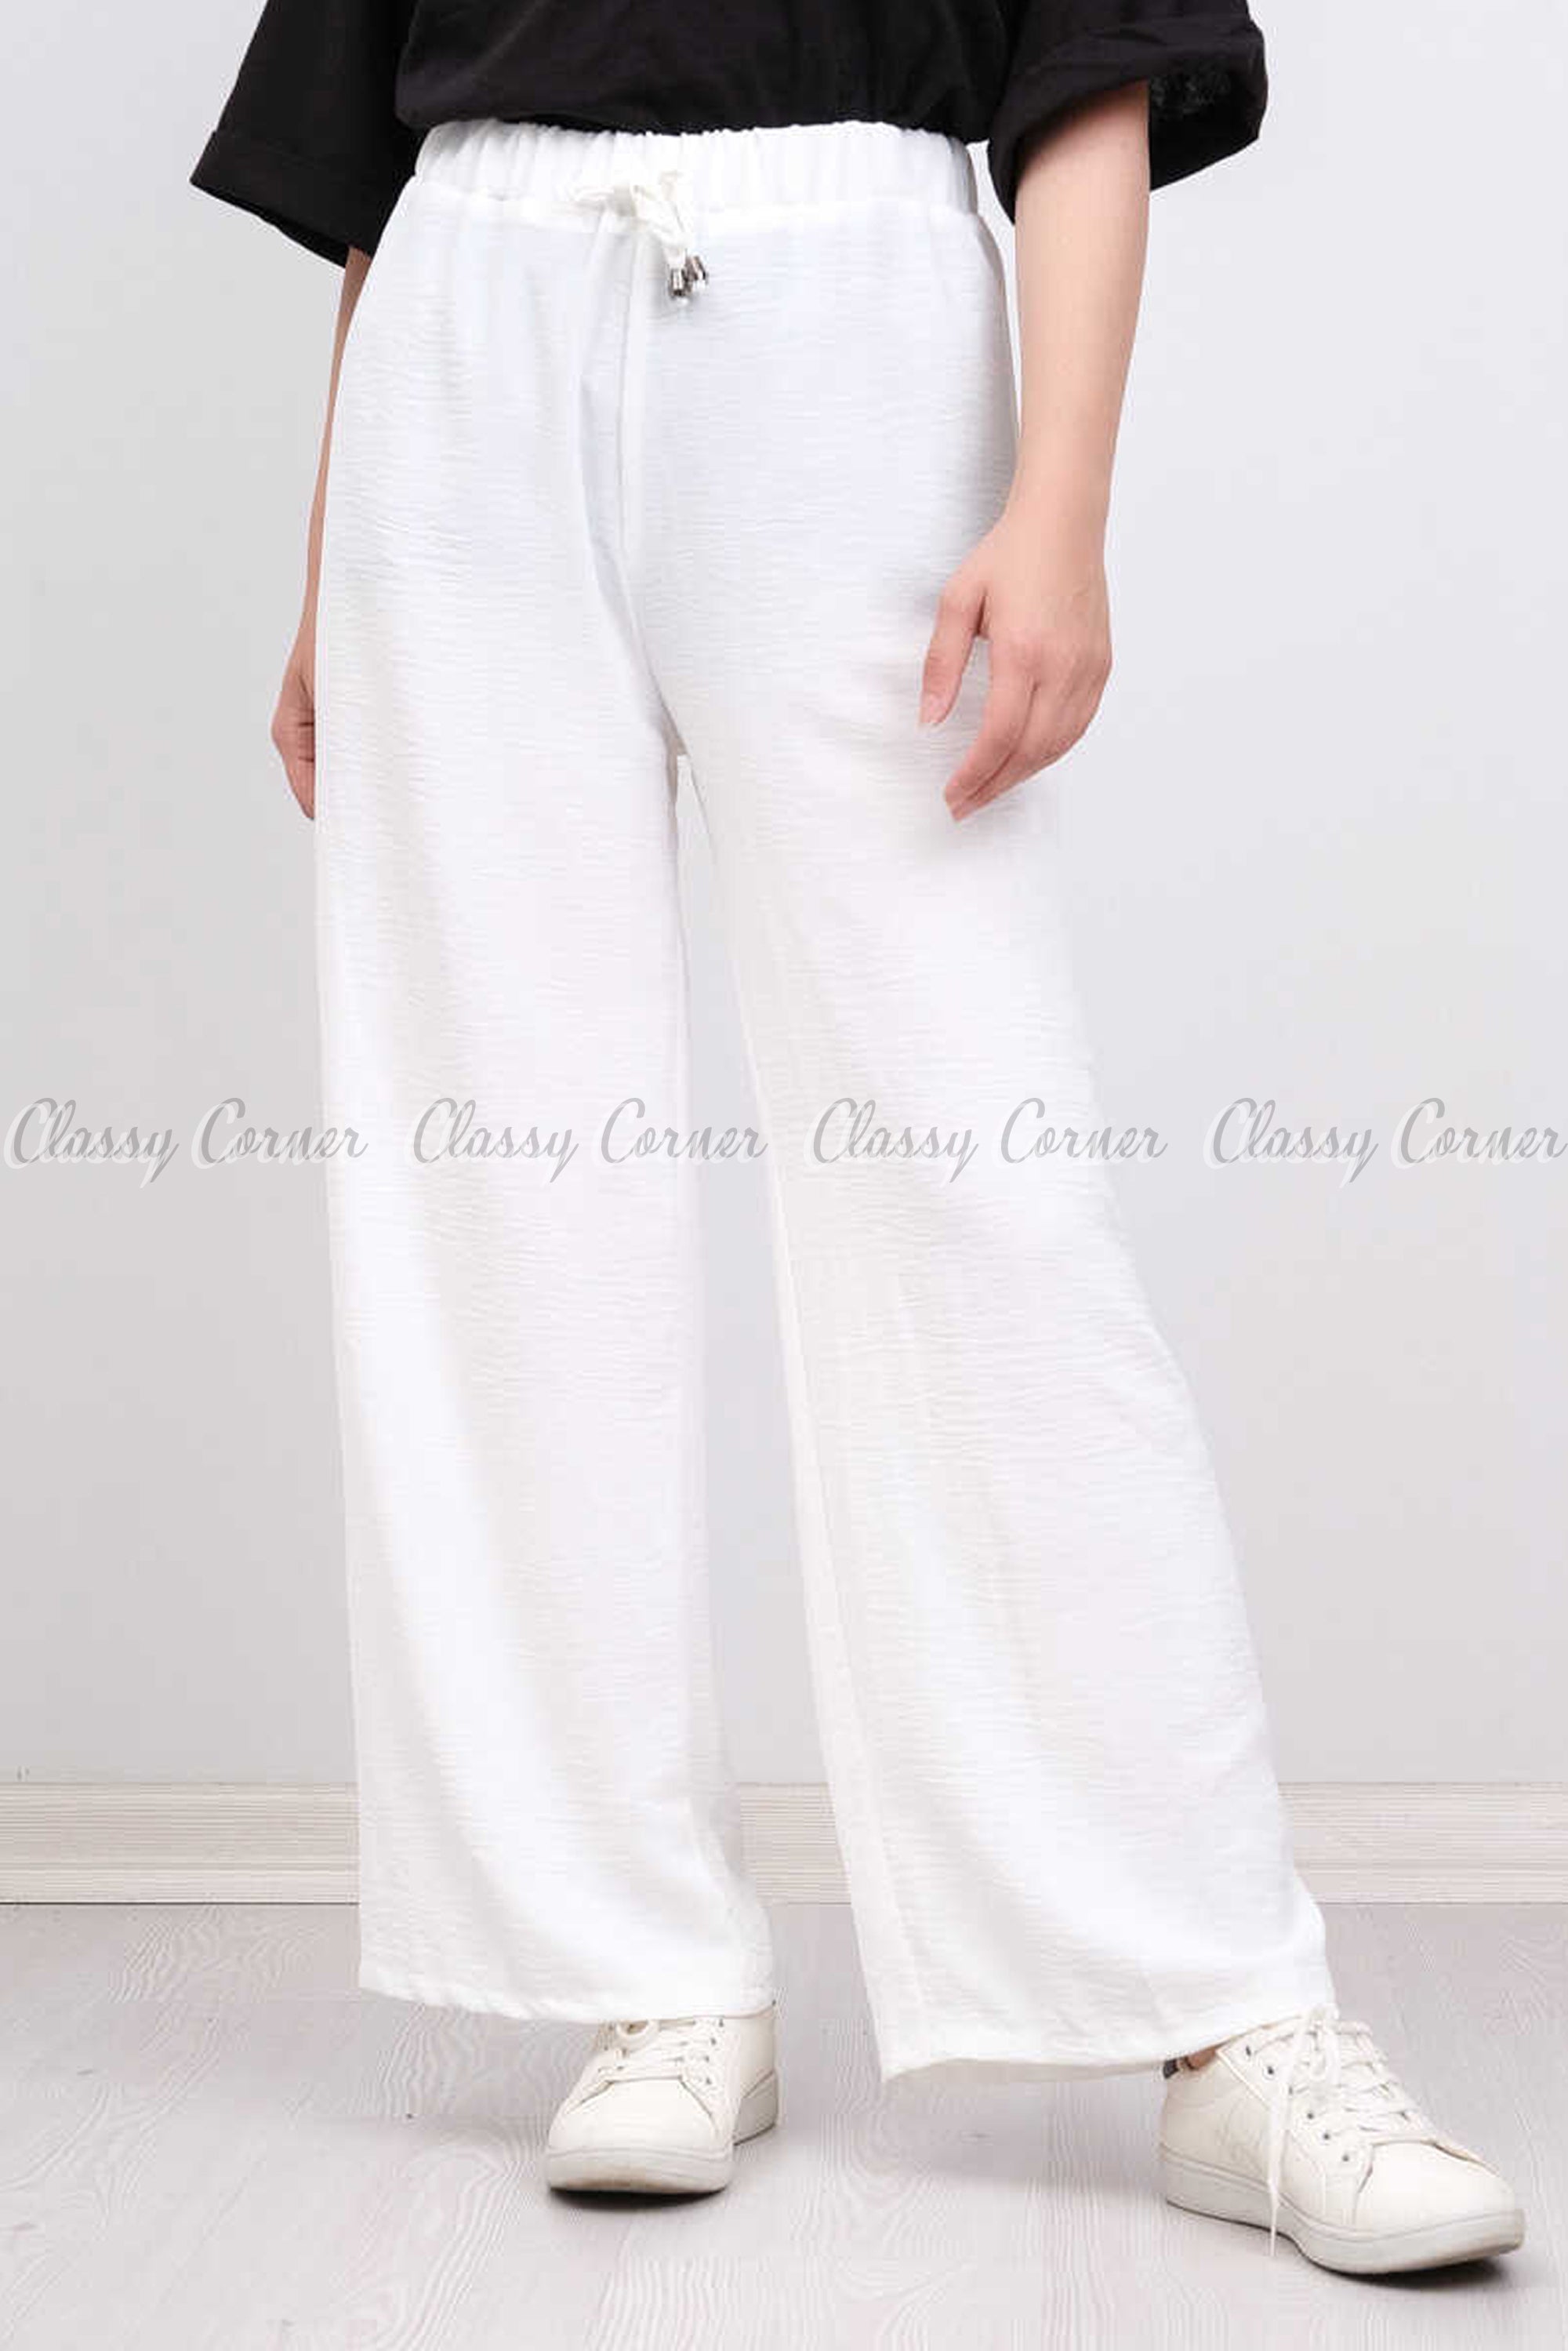 Elastic Waist White Modest Comfy Pants - full front view